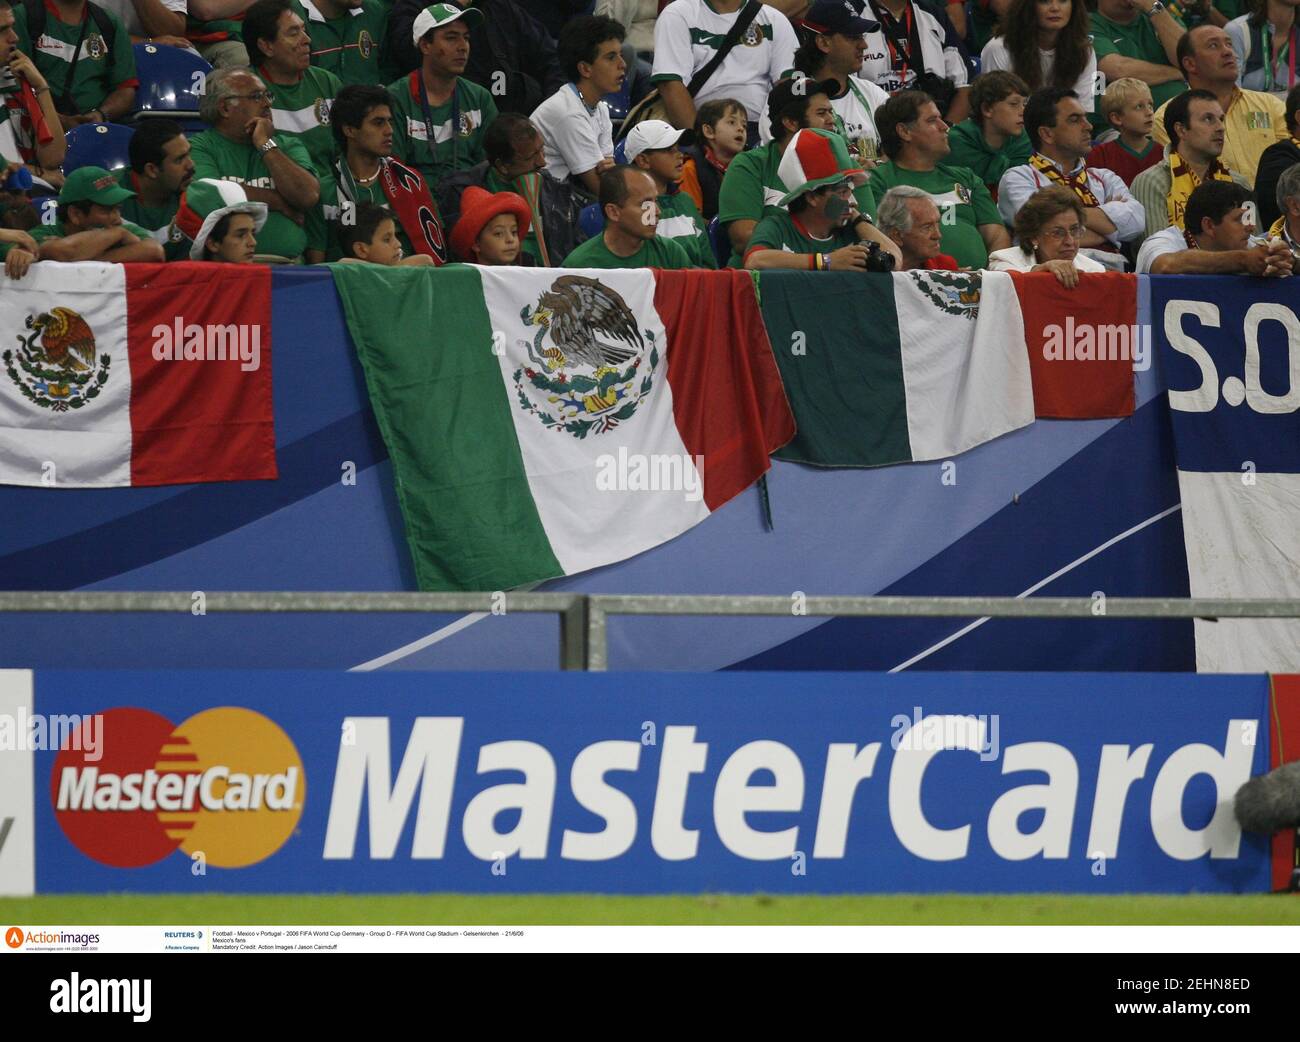 Football - Mexico v Portugal - 2006 FIFA World Cup Germany - Group D - FIFA World Cup Stadium - Gelsenkirchen  - 21/6/06  Mexico's fans  Mandatory Credit: Action Images / Jason Cairnduff Stock Photo